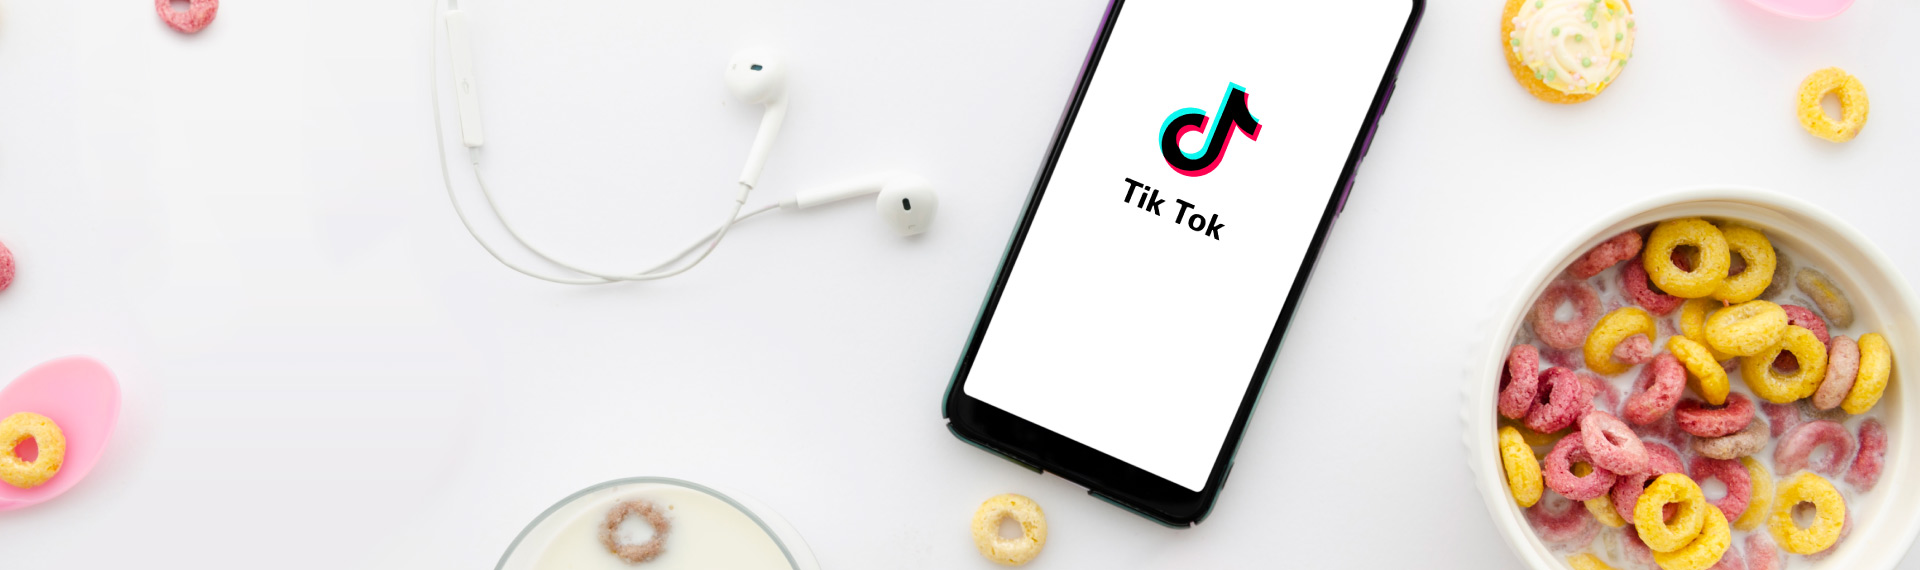 The Ultimate Branding and Marketing Guide to TikTok.